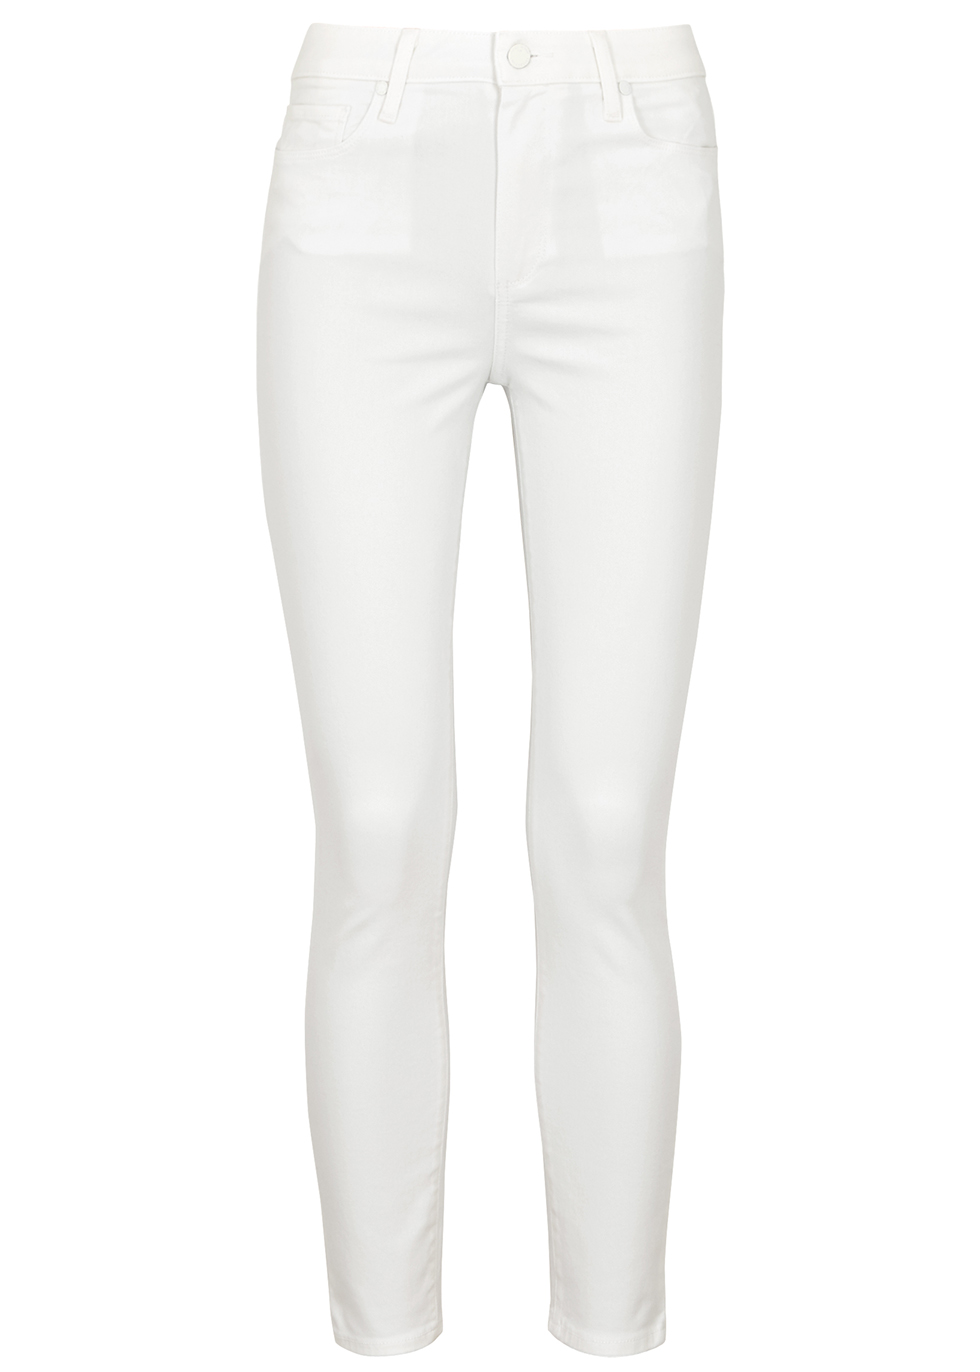 Hoxton Crop white skinny jeans